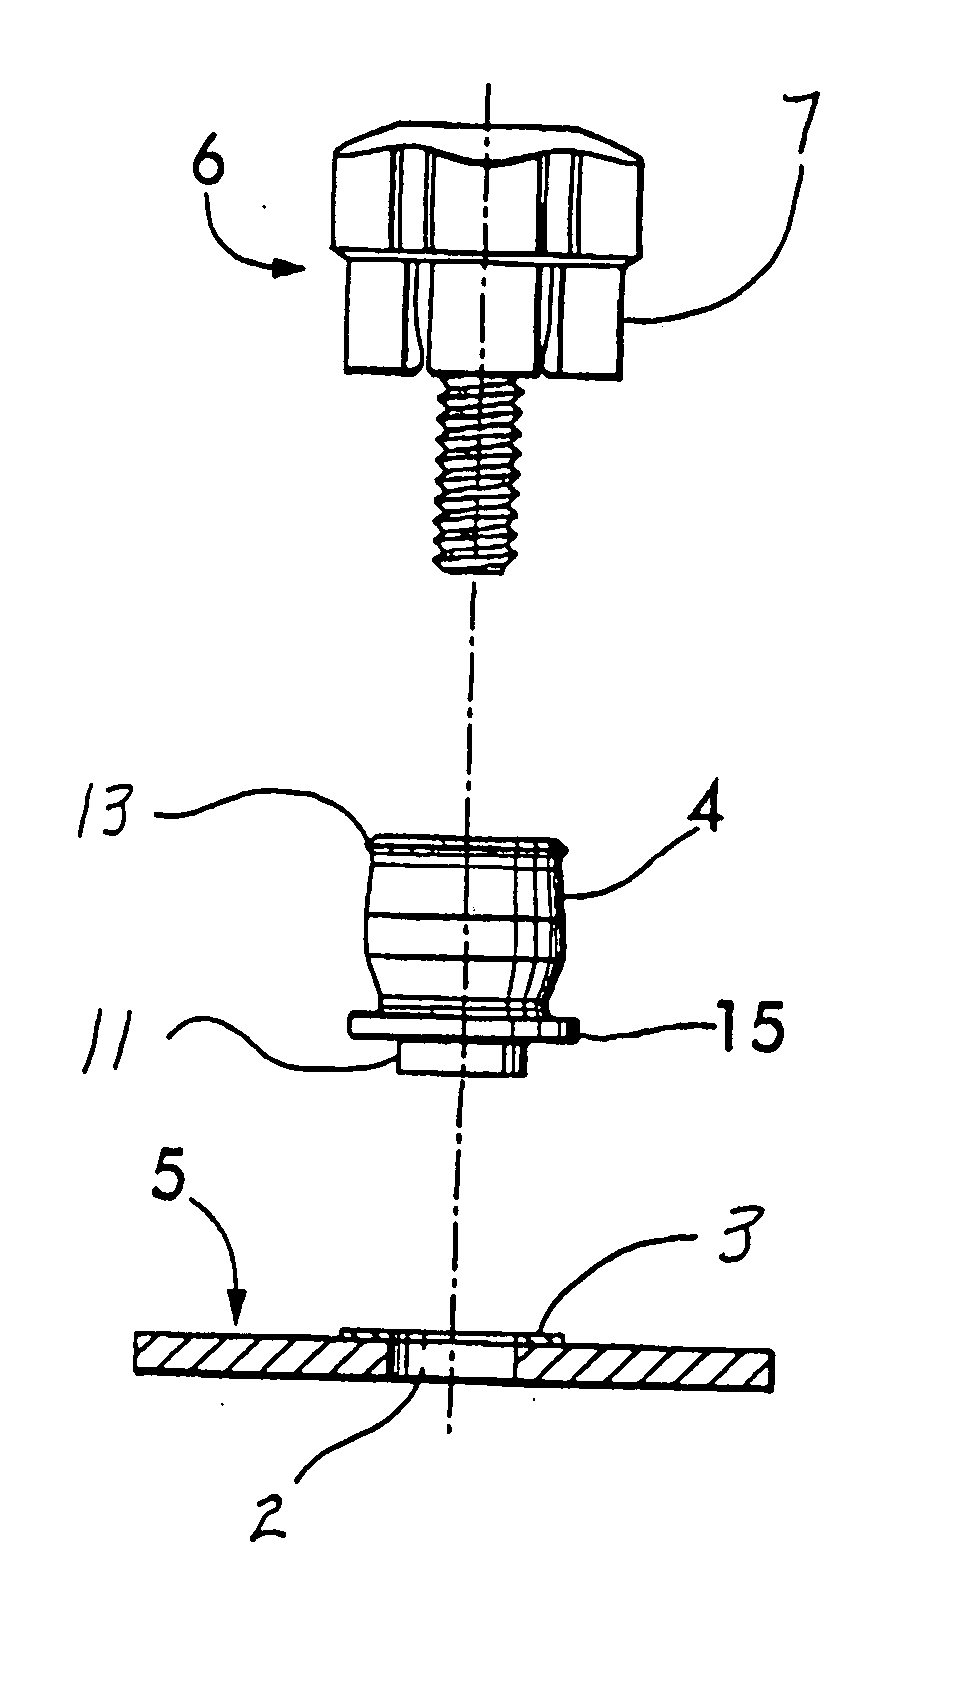 Method of attaching a captive panel fastener to a circuit board